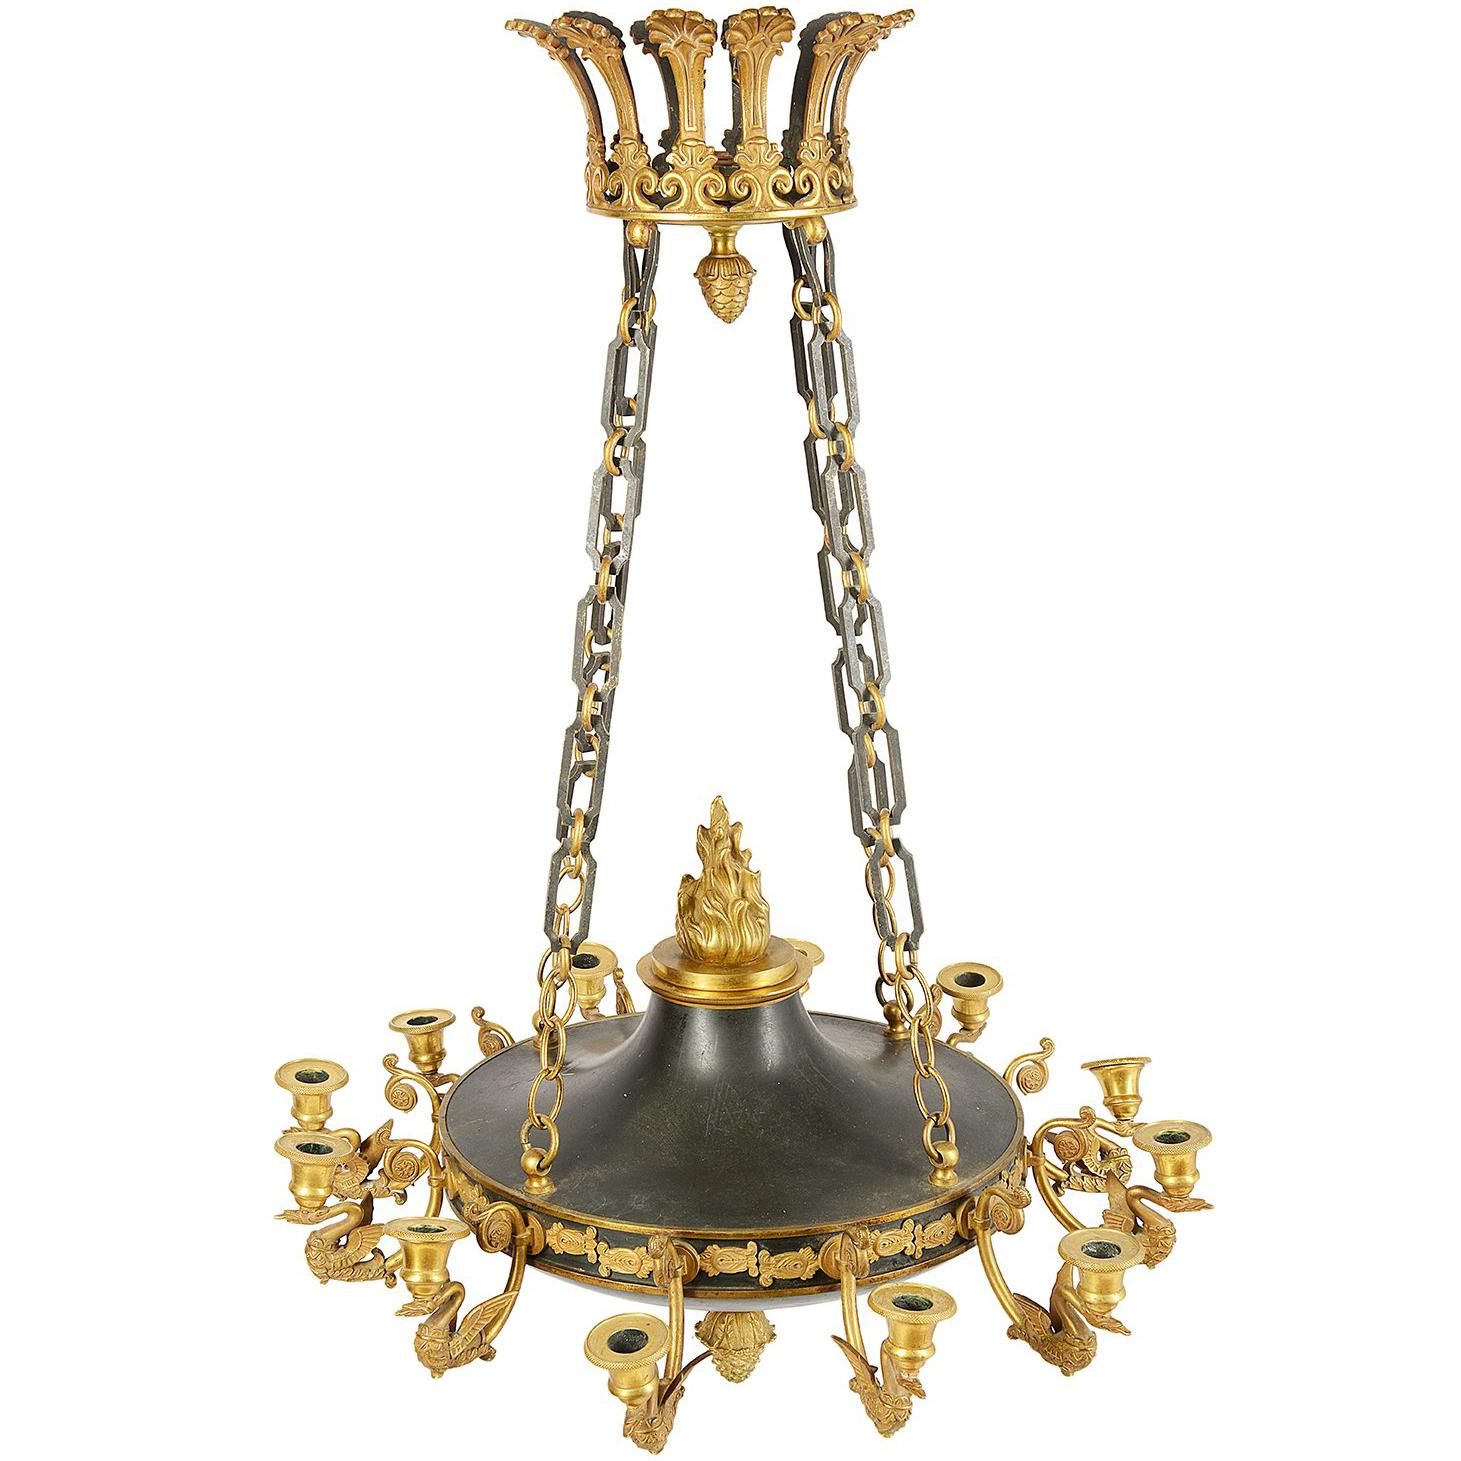 French Empire Influenced Chandelier, 19th Century